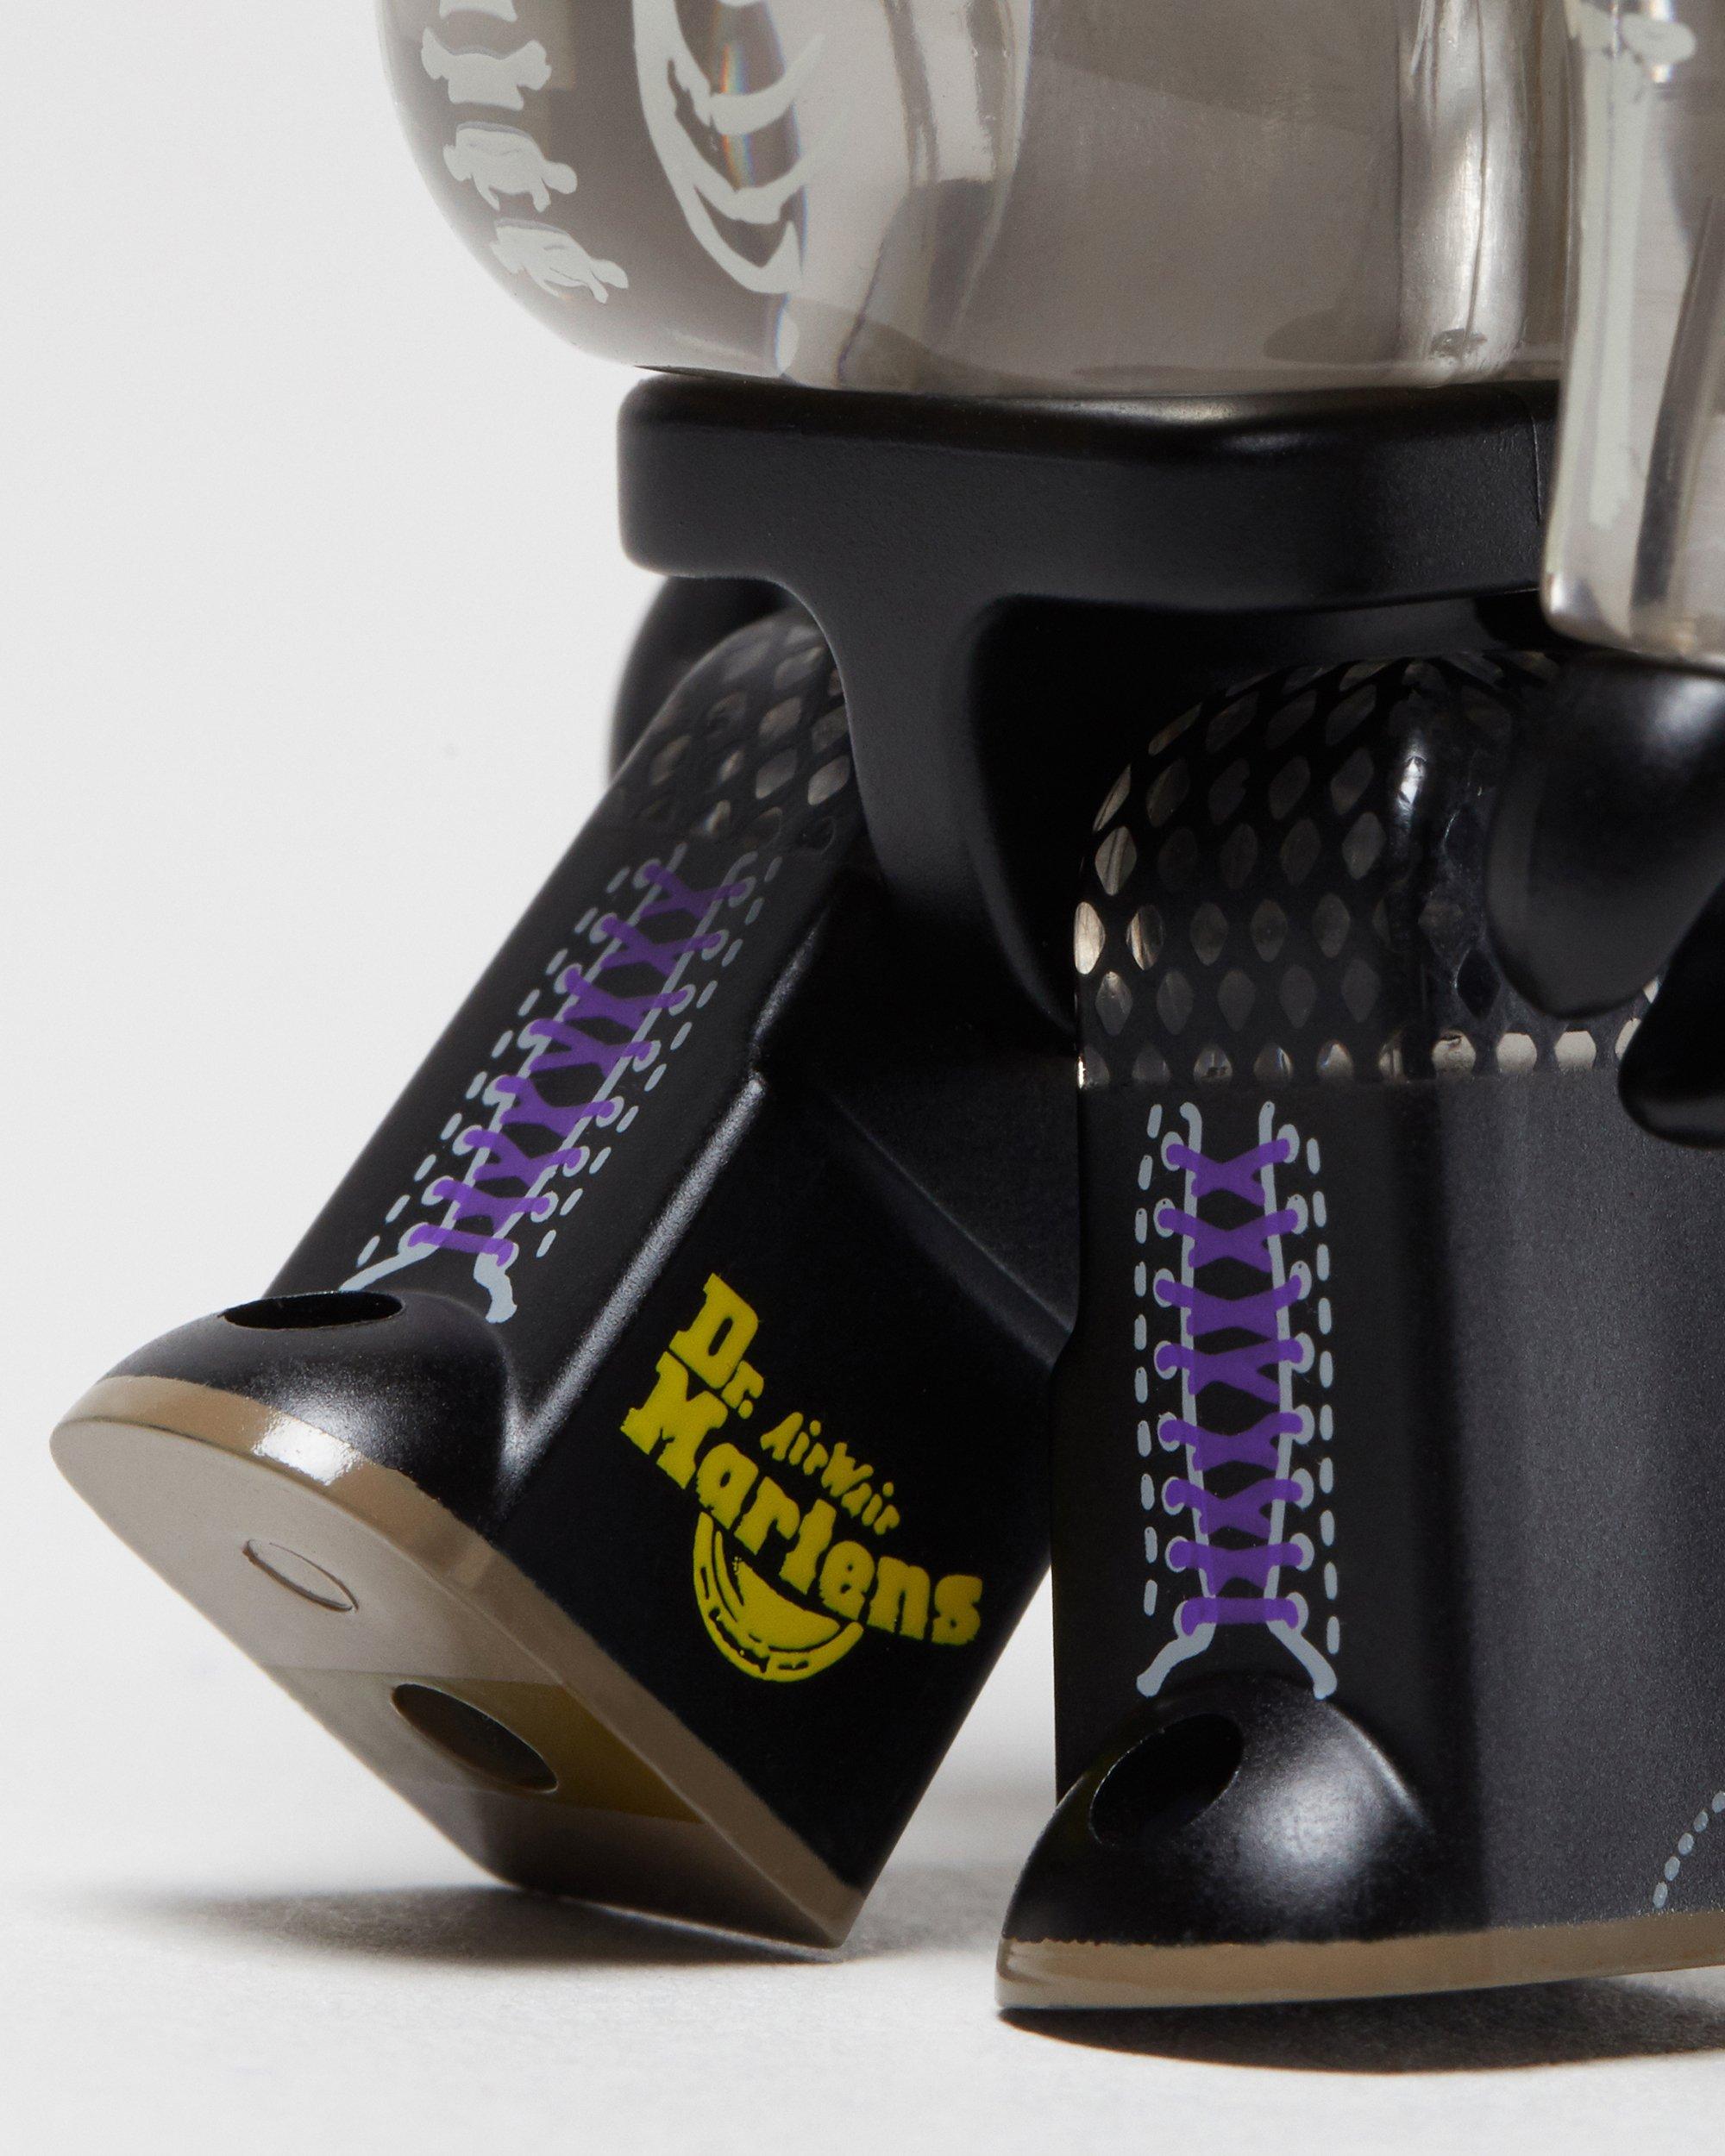 80'S BE@RBRICK COLLECTIBLE FIGUREBE@RBRICK COLLECTIBLE FIGURE Dr. Martens